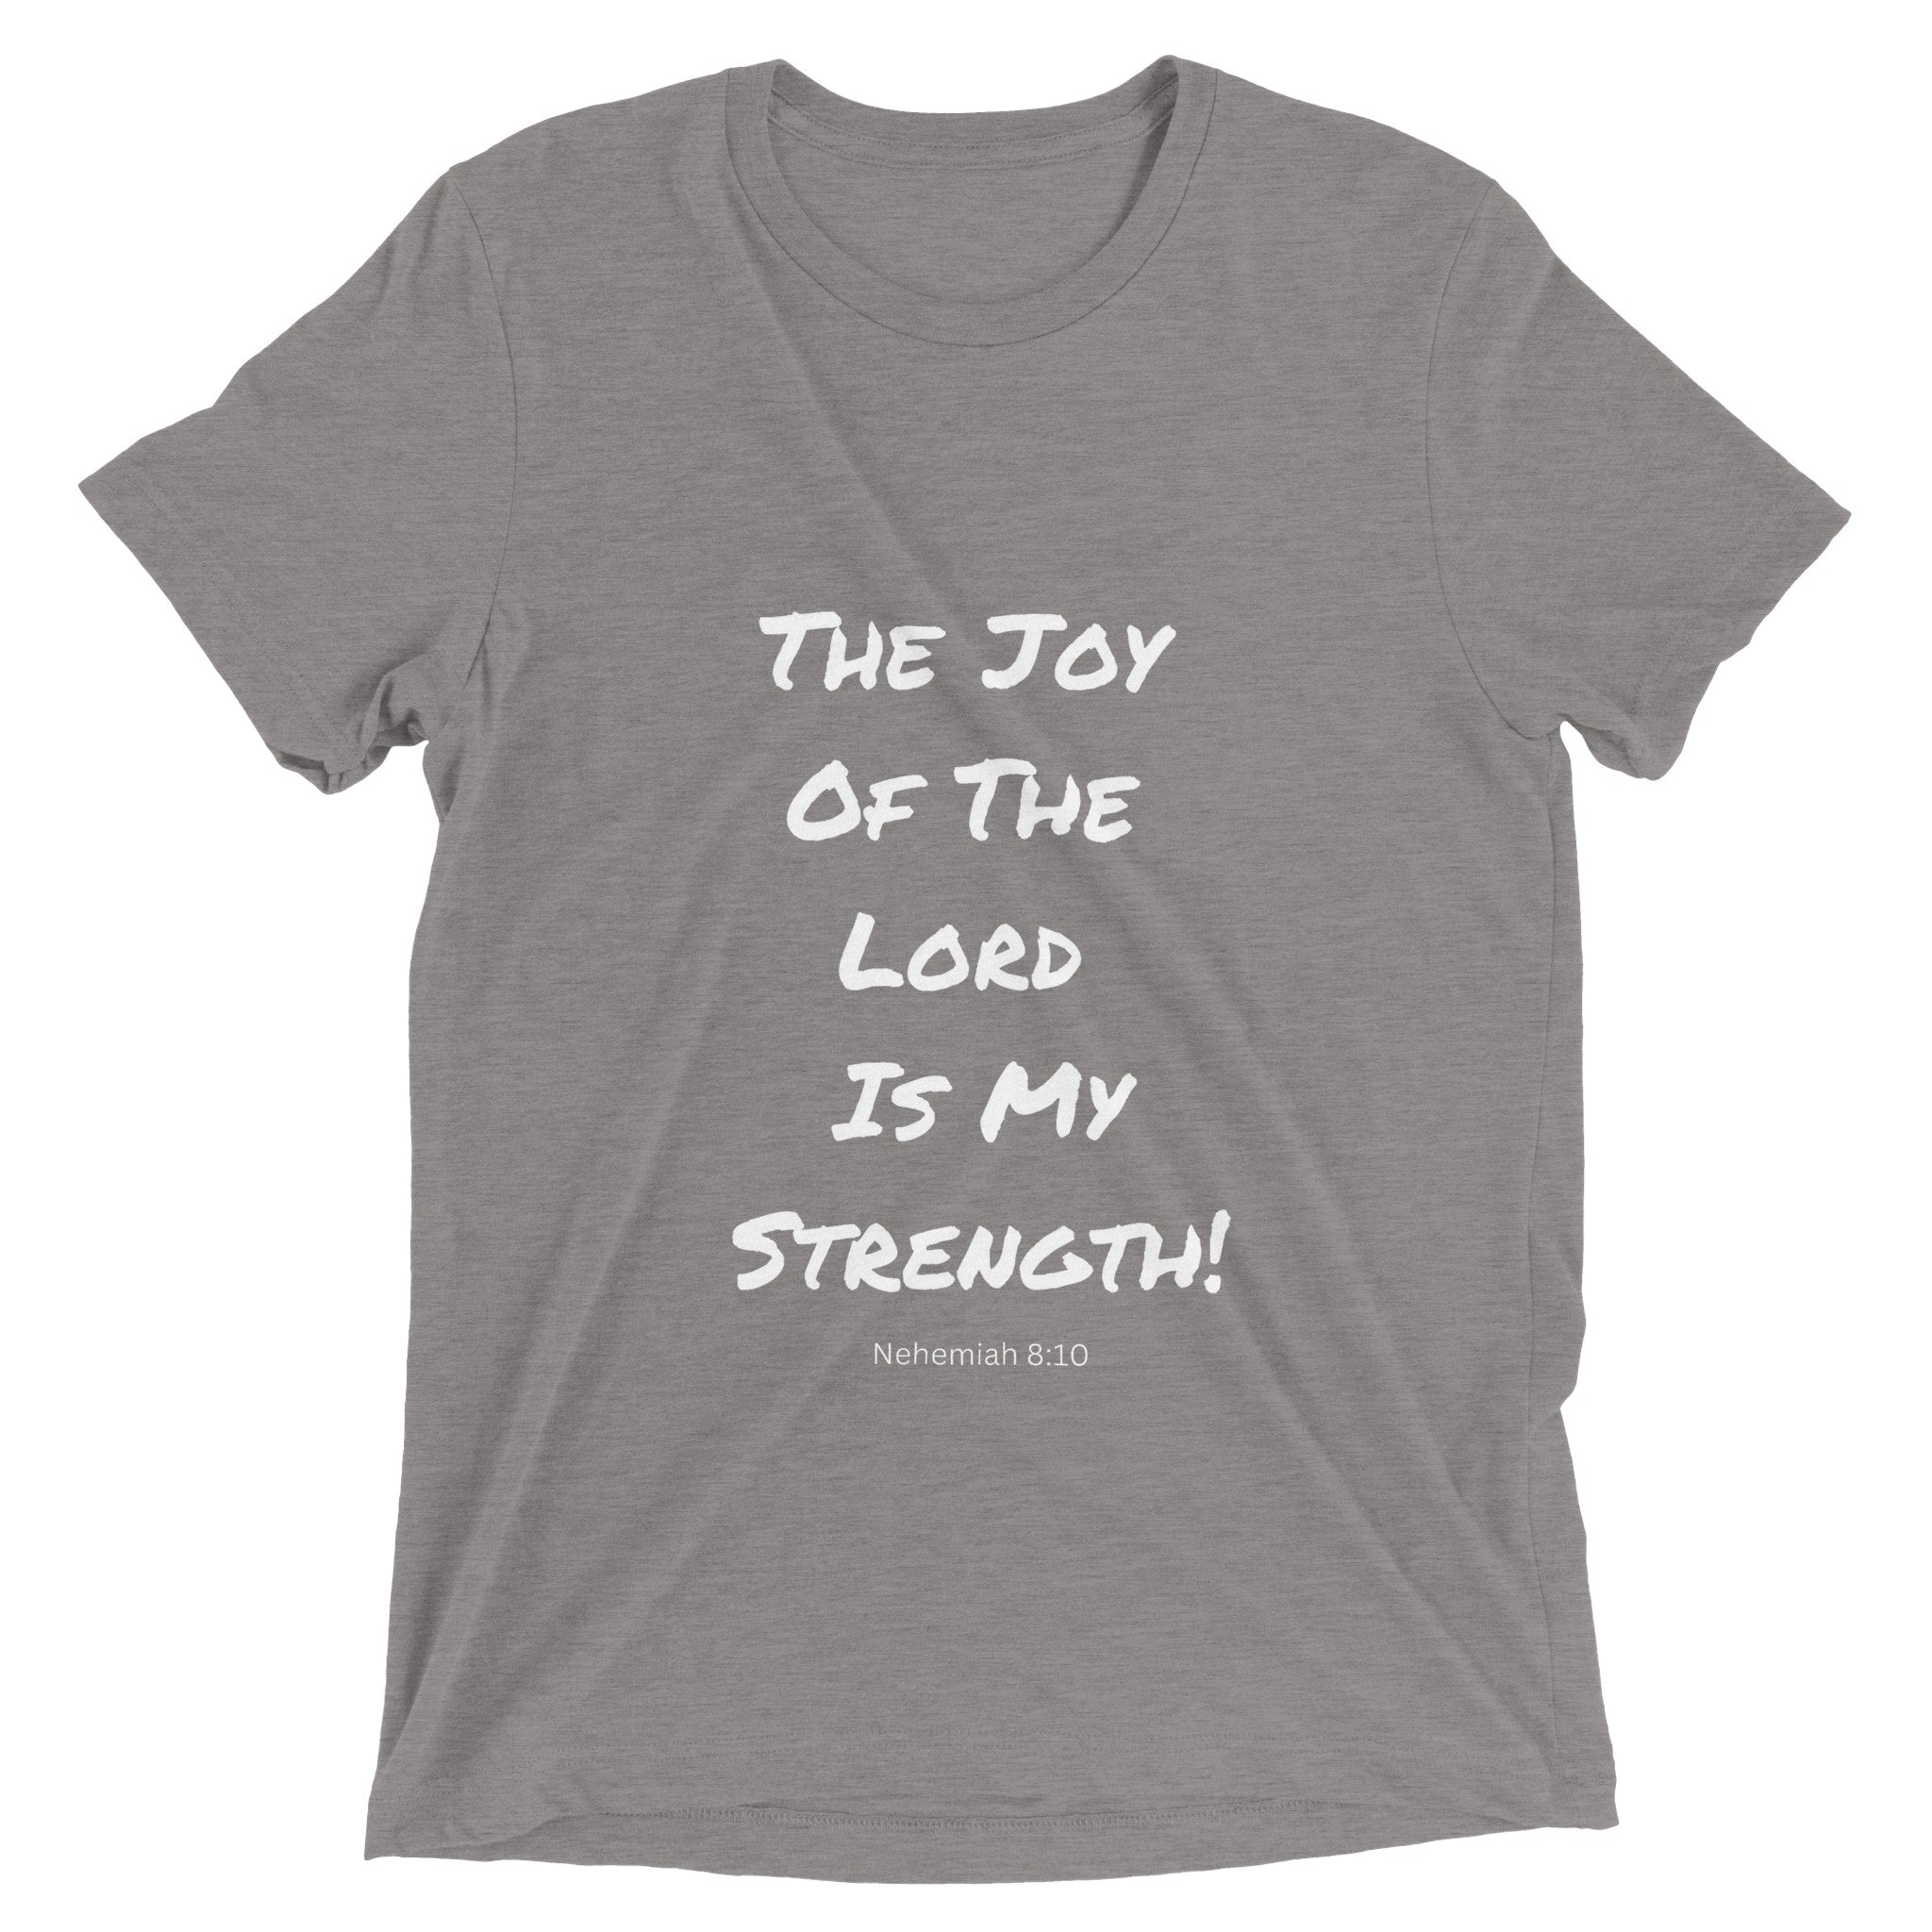 The Joy Of The Lord Is My Strength! Triblend Unisex Crewneck T-shirt